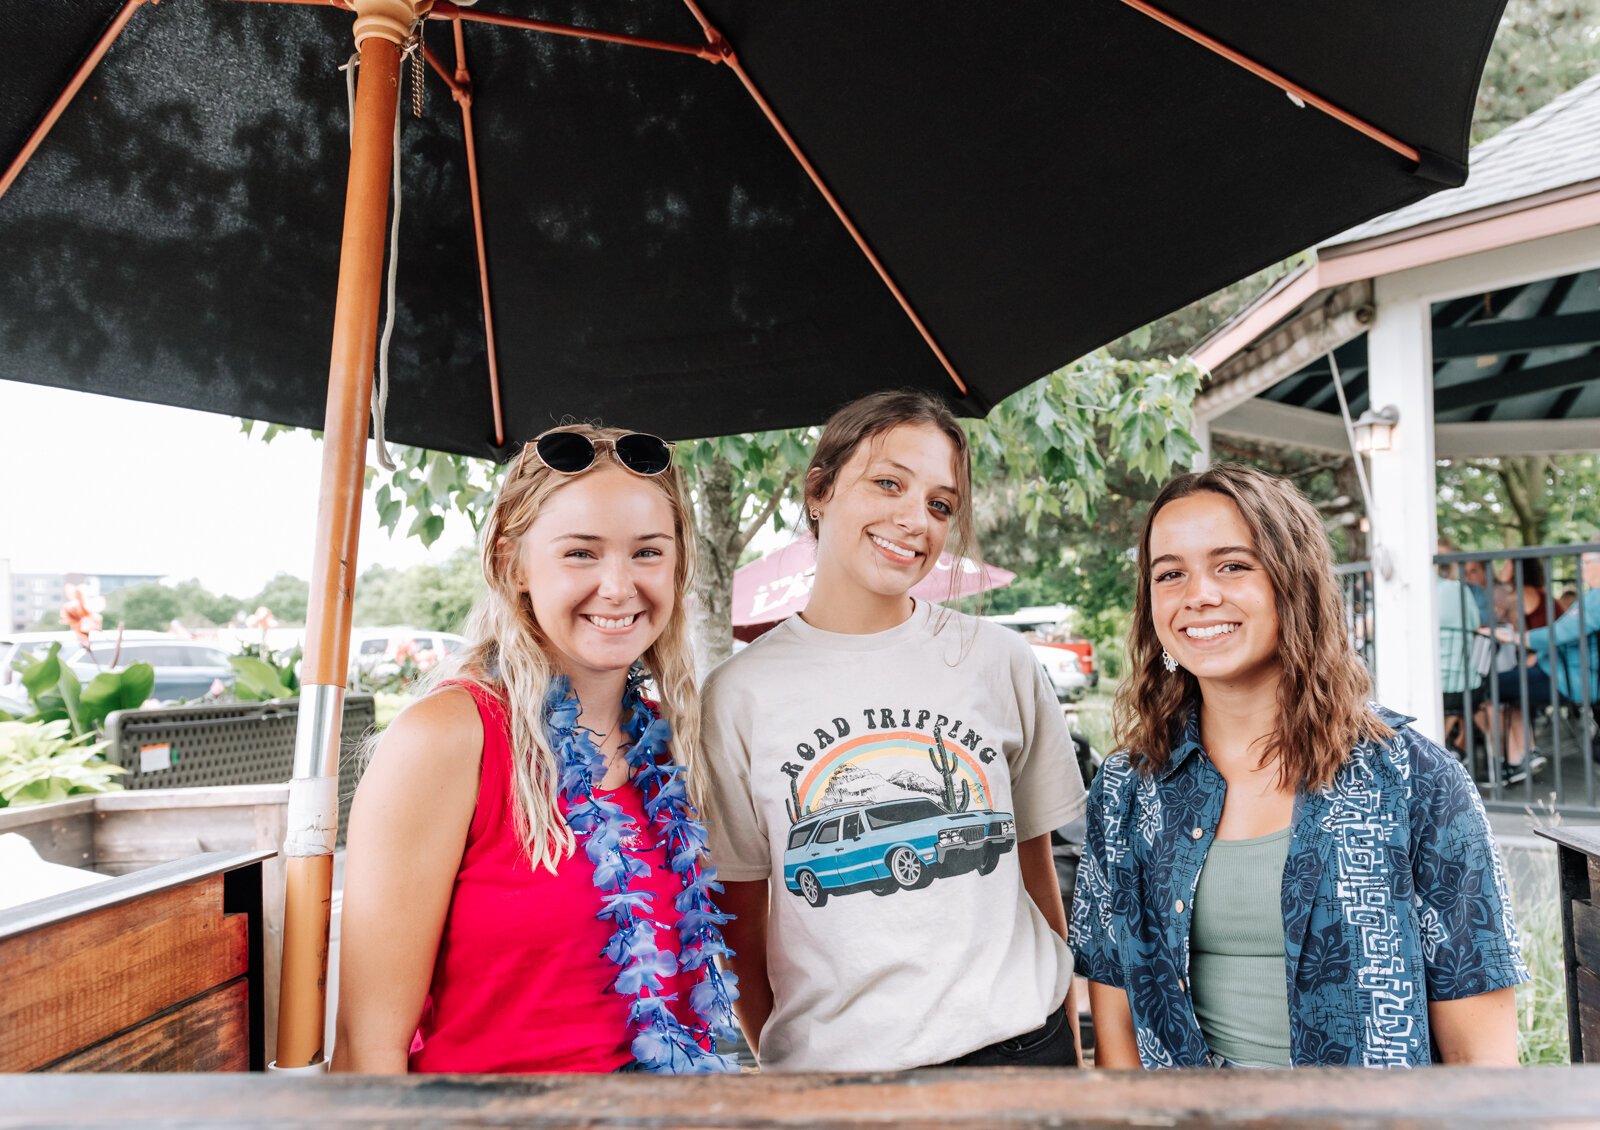 From left: Hostesses' Tia Gensic, Grace Runyon, and Abigail Hall at The Deck, 305 E. Superior.